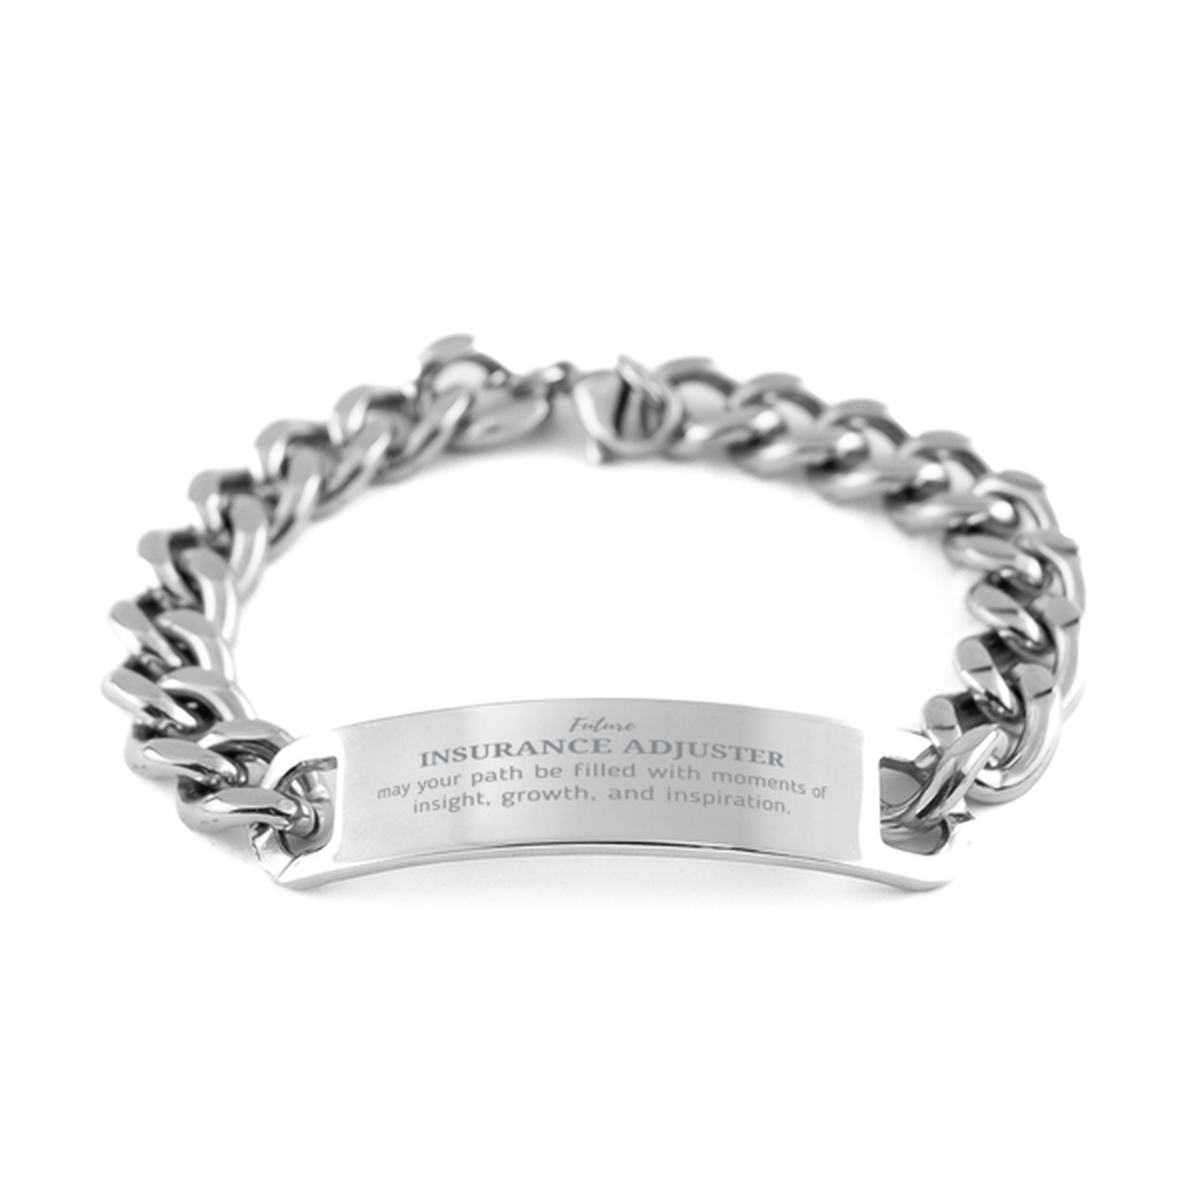 Future Insurance Adjuster Gifts, May your path be filled with moments of insight, Graduation Gifts for New Insurance Adjuster, Christmas Unique Cuban Chain Stainless Steel Bracelet For Men, Women, Friends